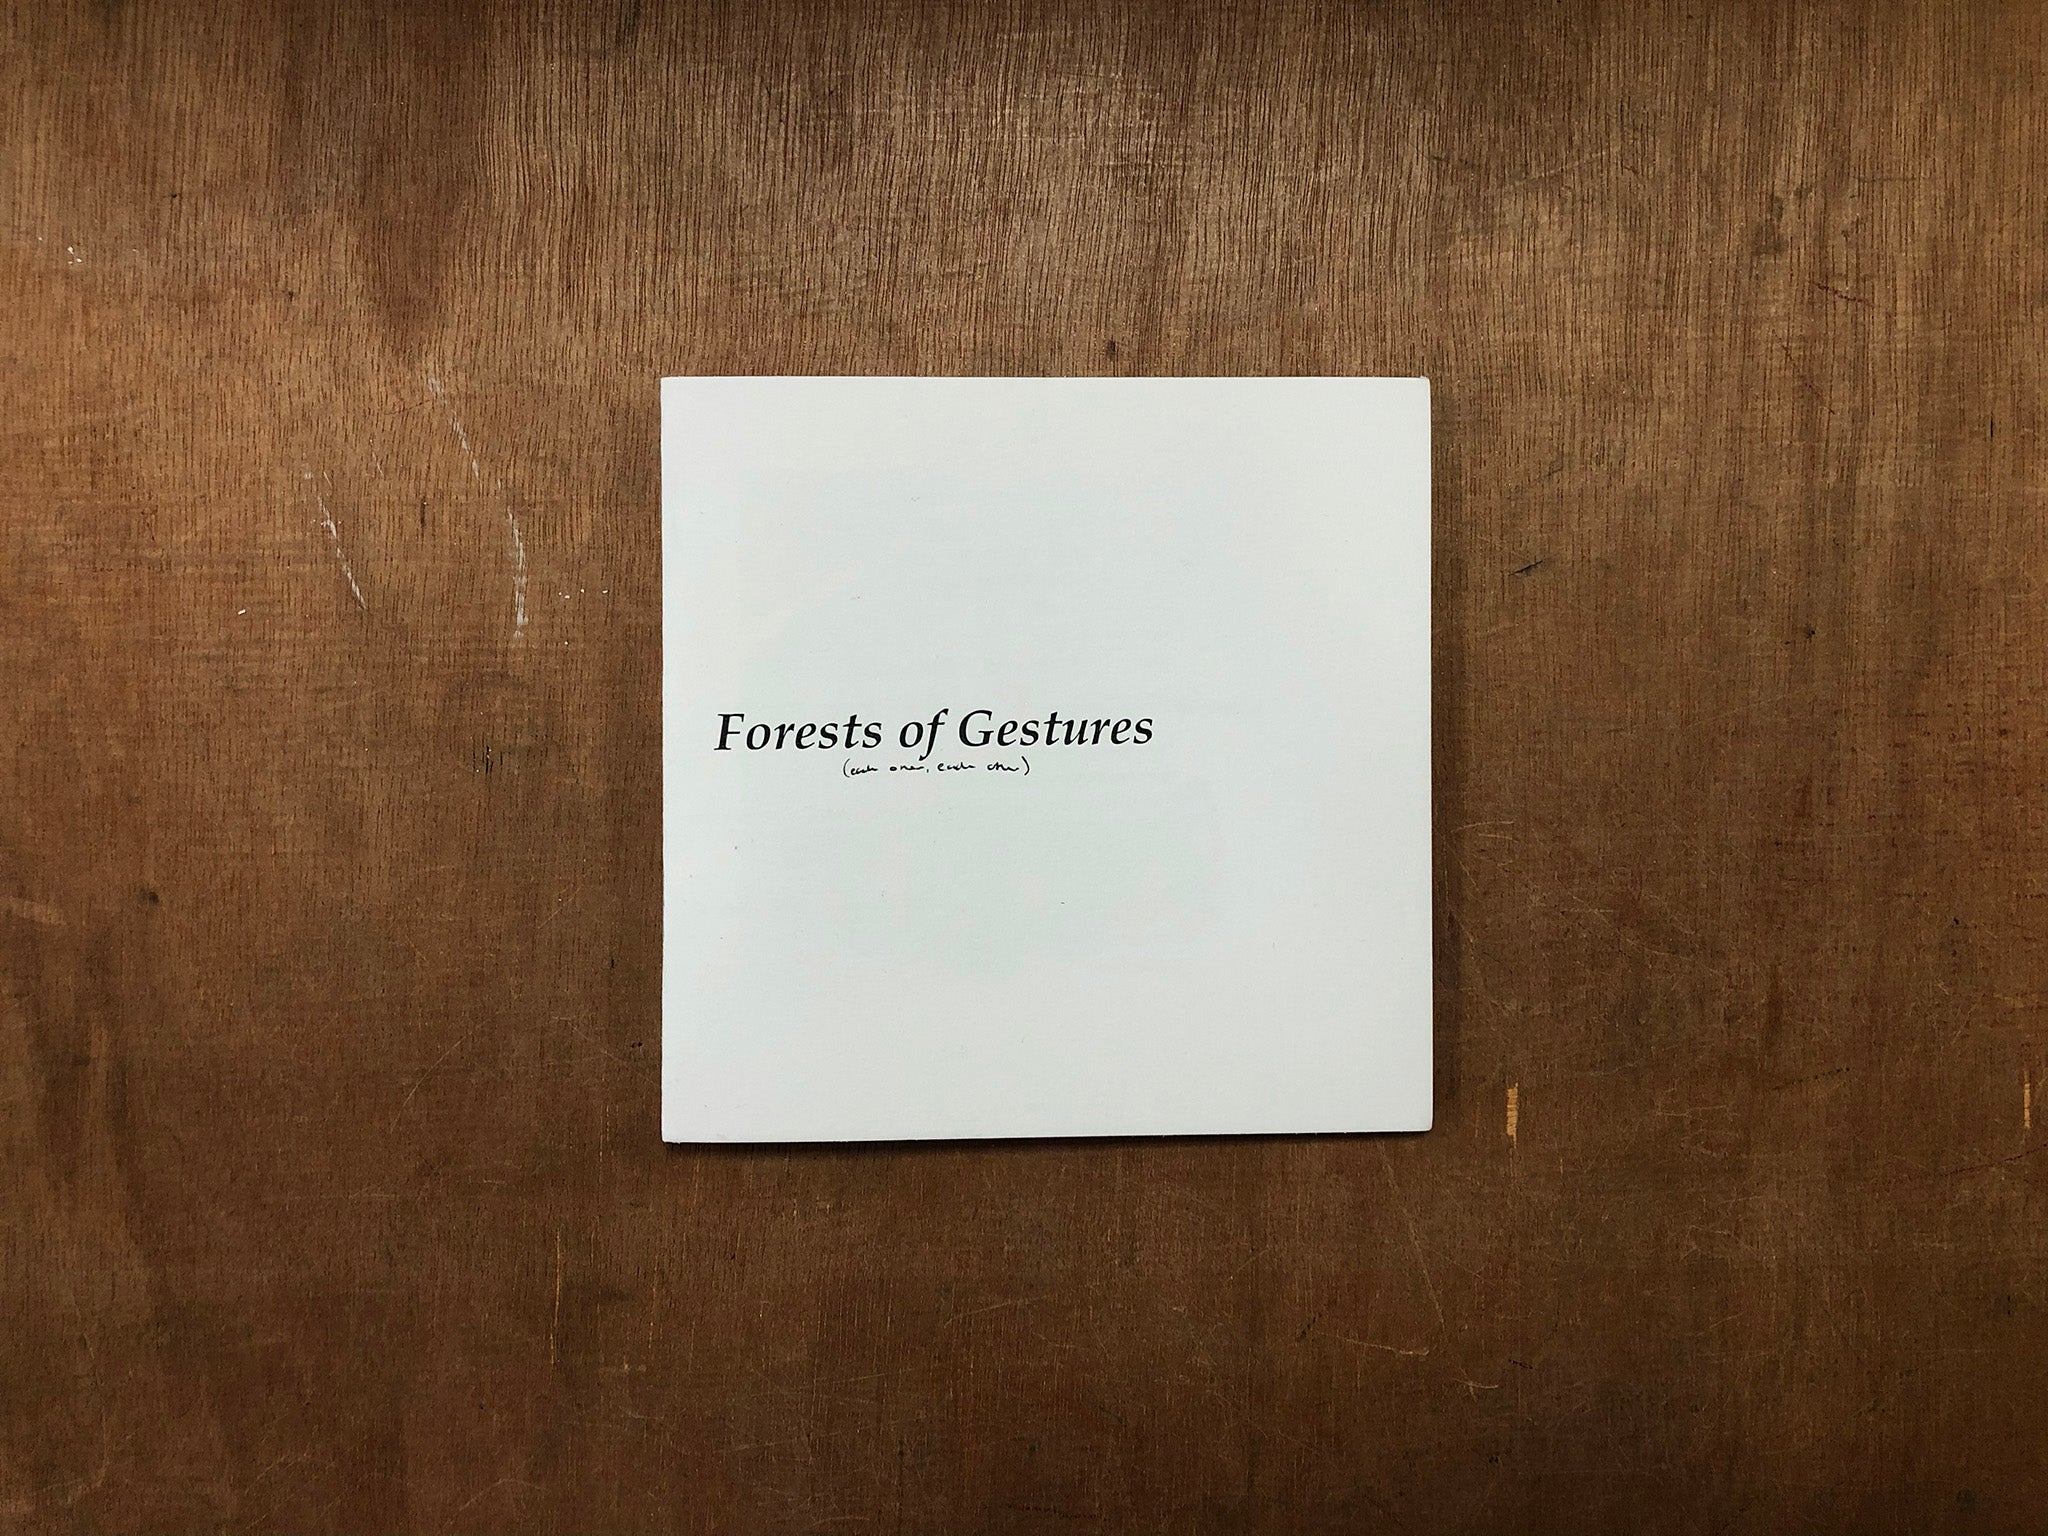 FORESTS OF GESTURES (EACH OTHER, EACH OTHER) by Samantha Jackson